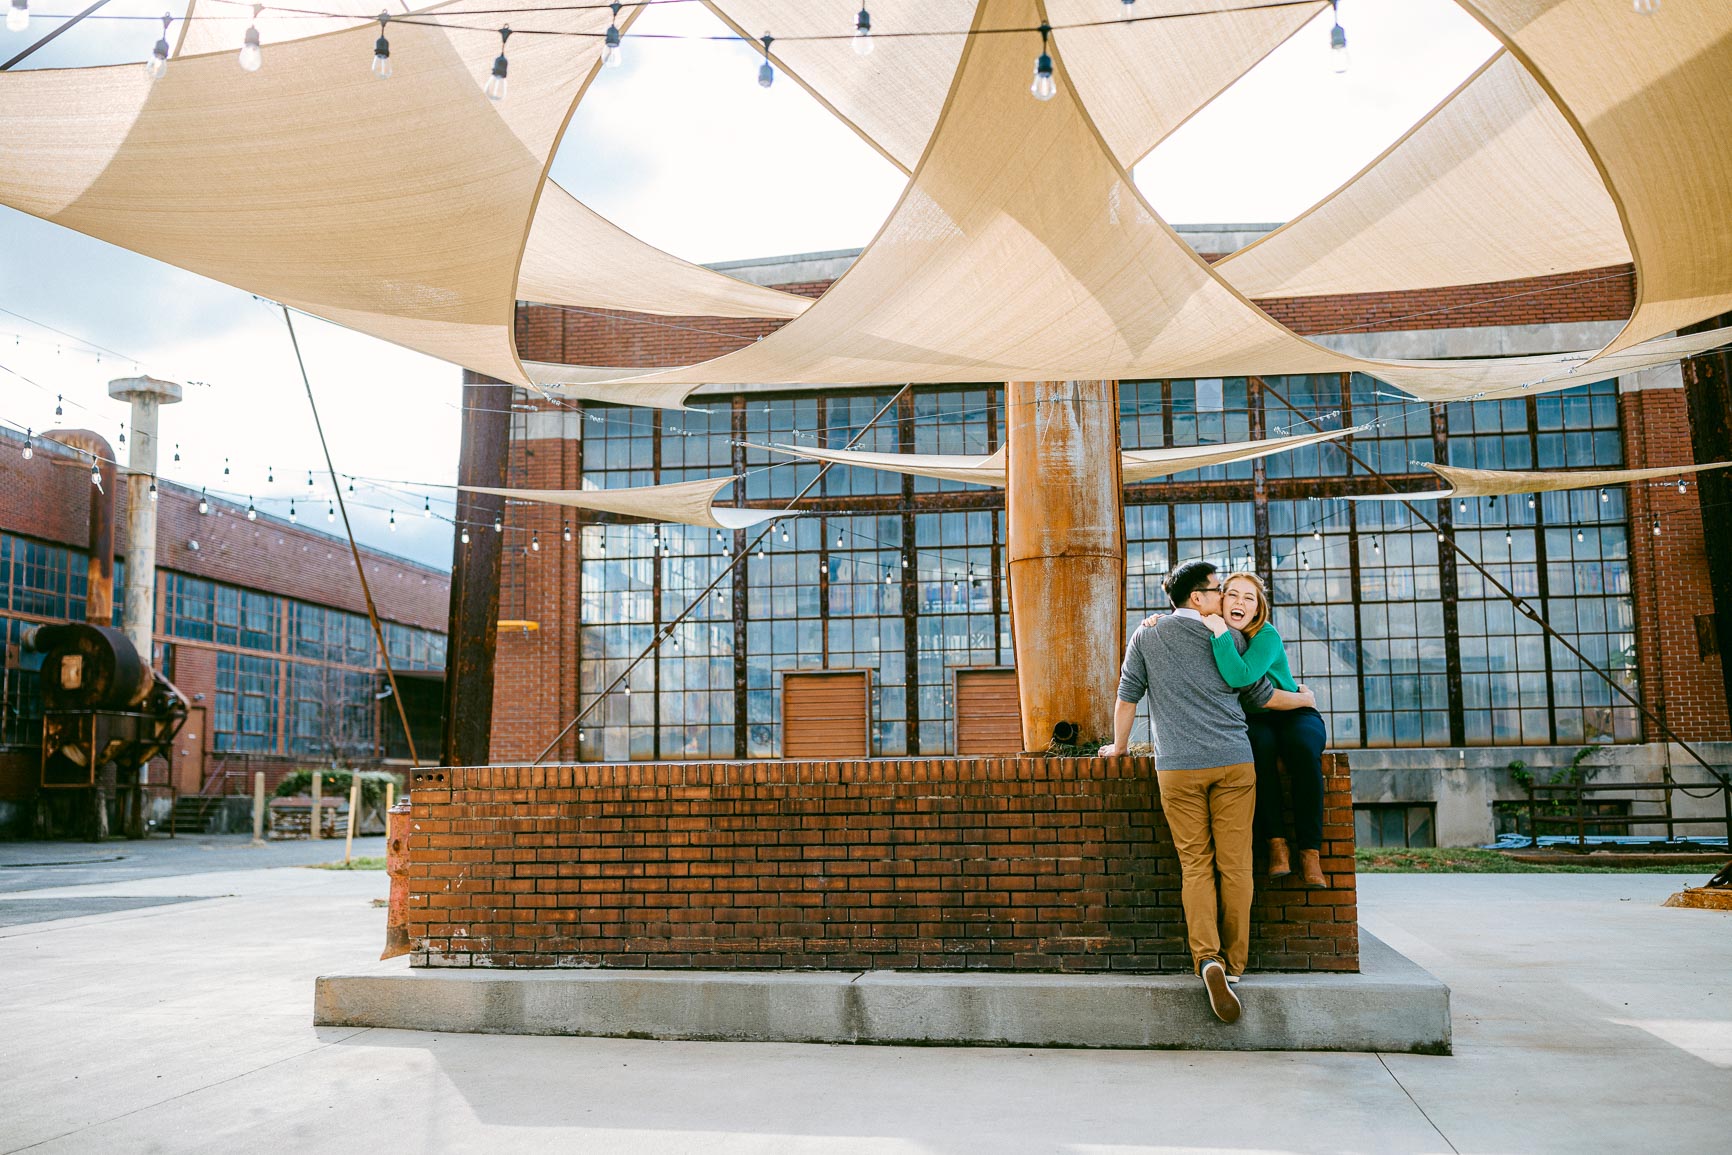 engagement session at camp north end shot by Nhieu Tang Photography | nhieutang.com